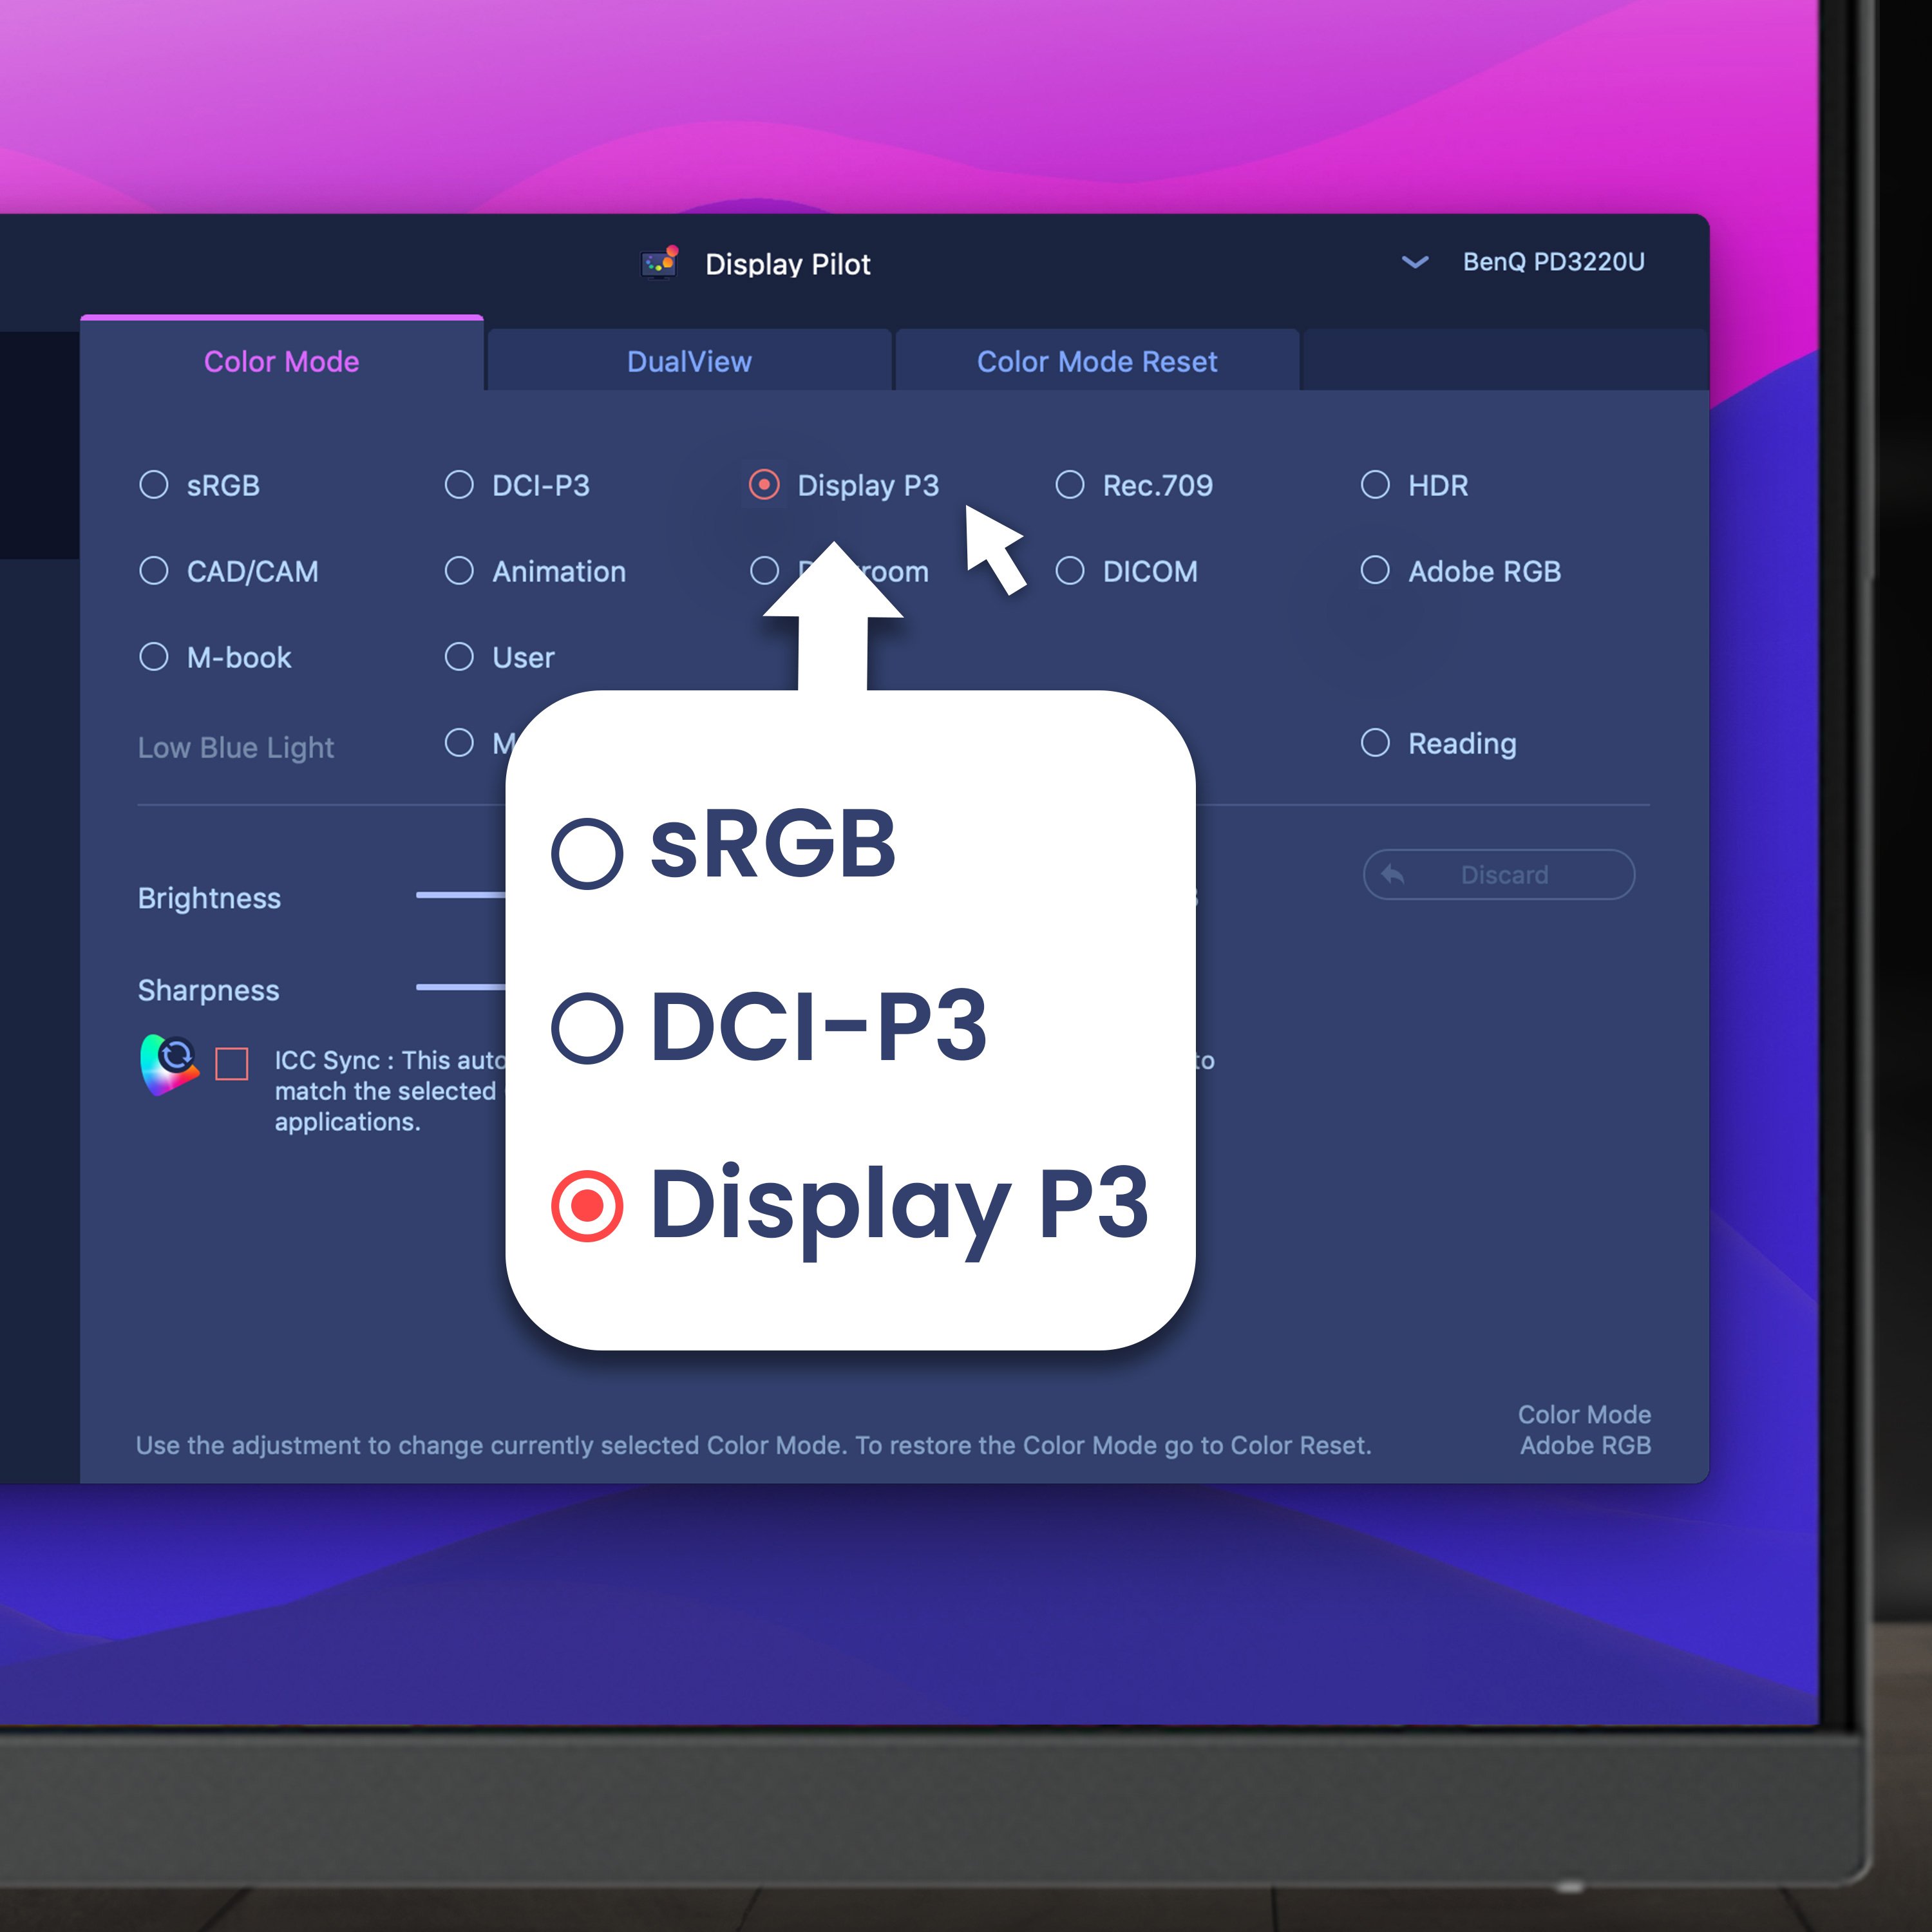 BenQ ICCsync not only directly installs pre-calibrated ICC profiles onto your Mac. Free from all exhausting settings, with BenQ Display Pilot, one step does all.